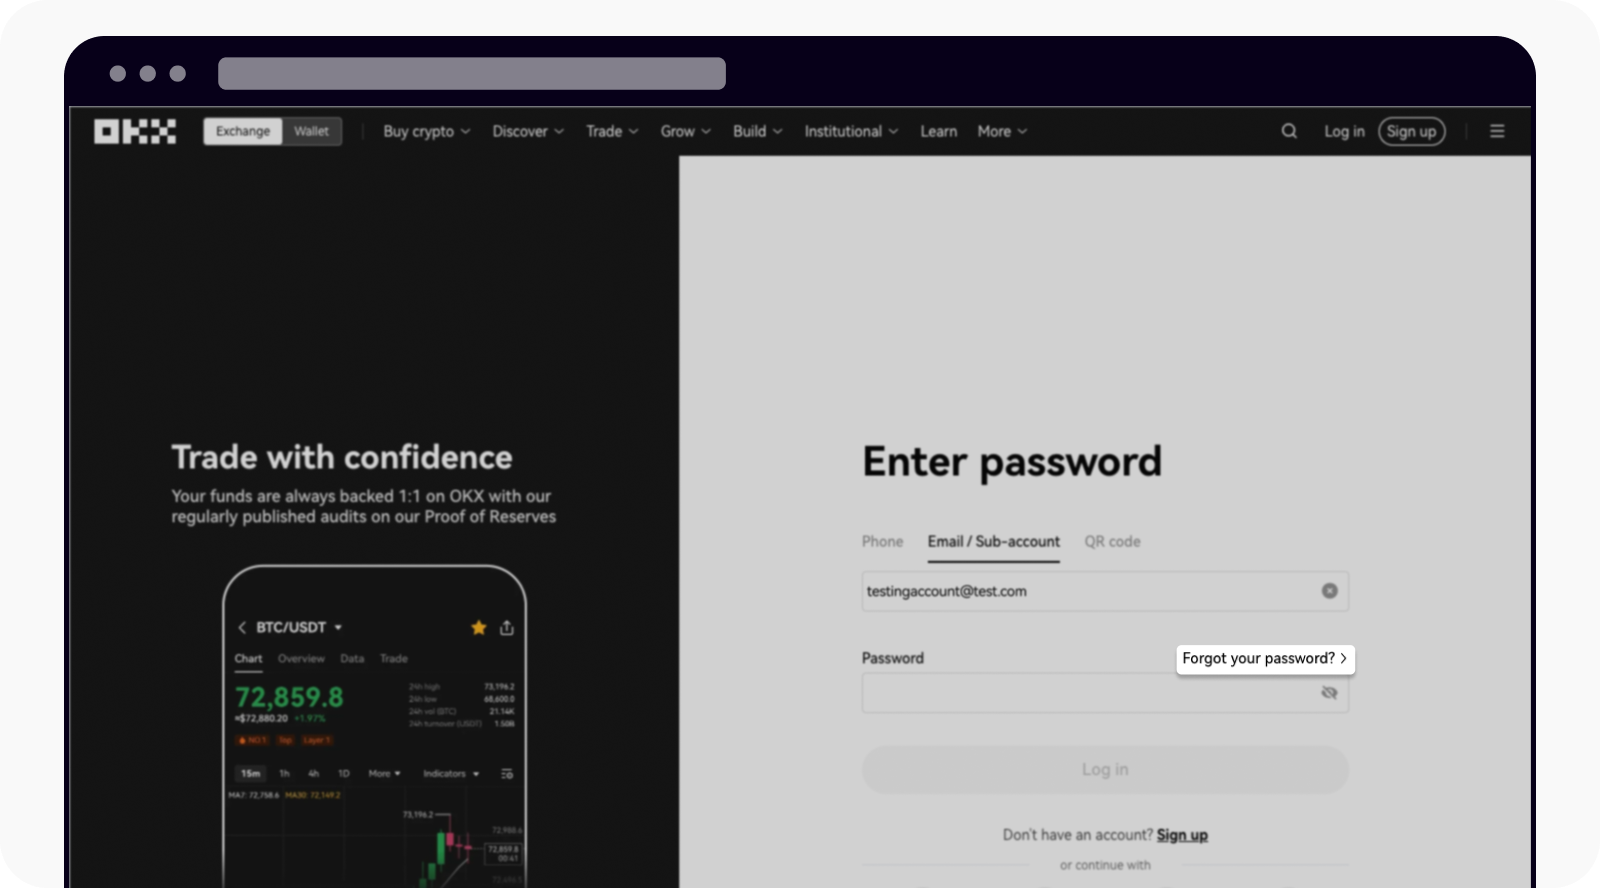 Opening the OKX login page